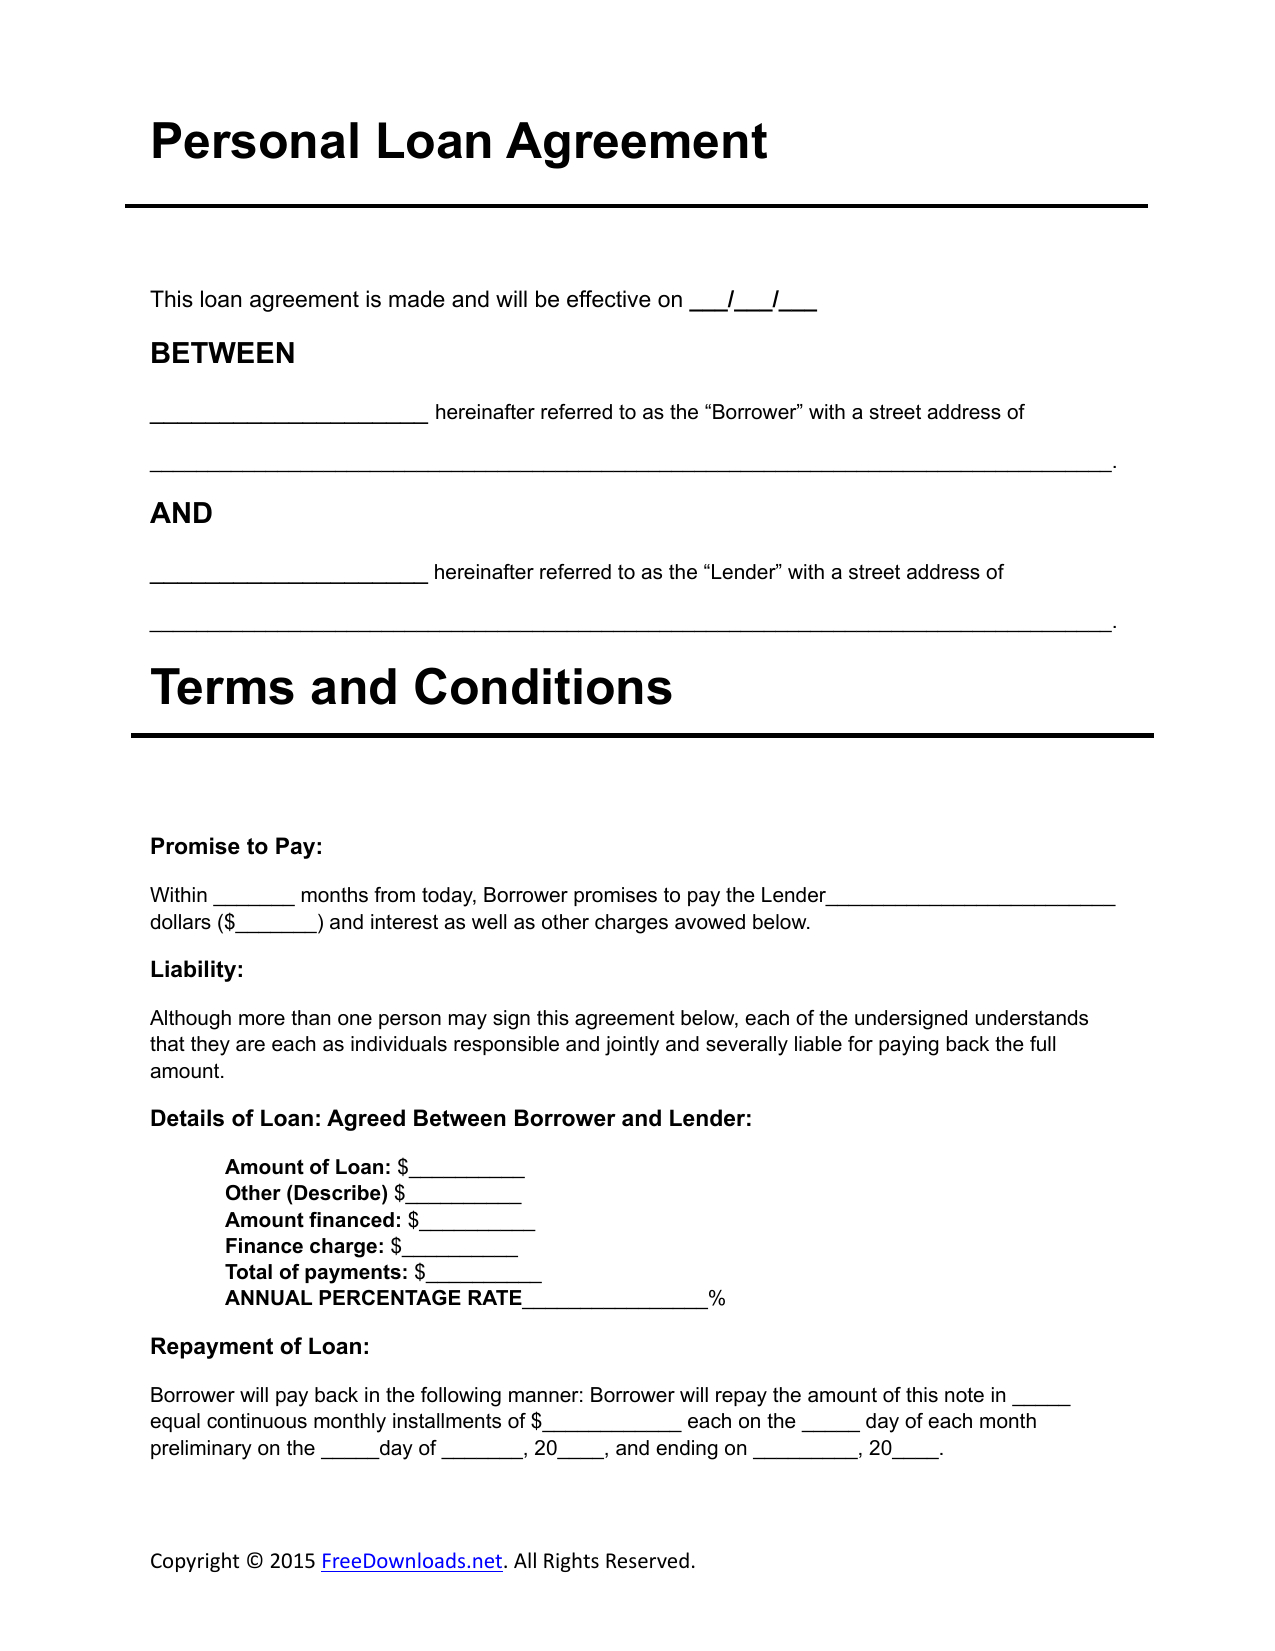 Download Personal Loan Agreement Template | Pdf | Rtf | Word - Free Printable Loan Agreement Form